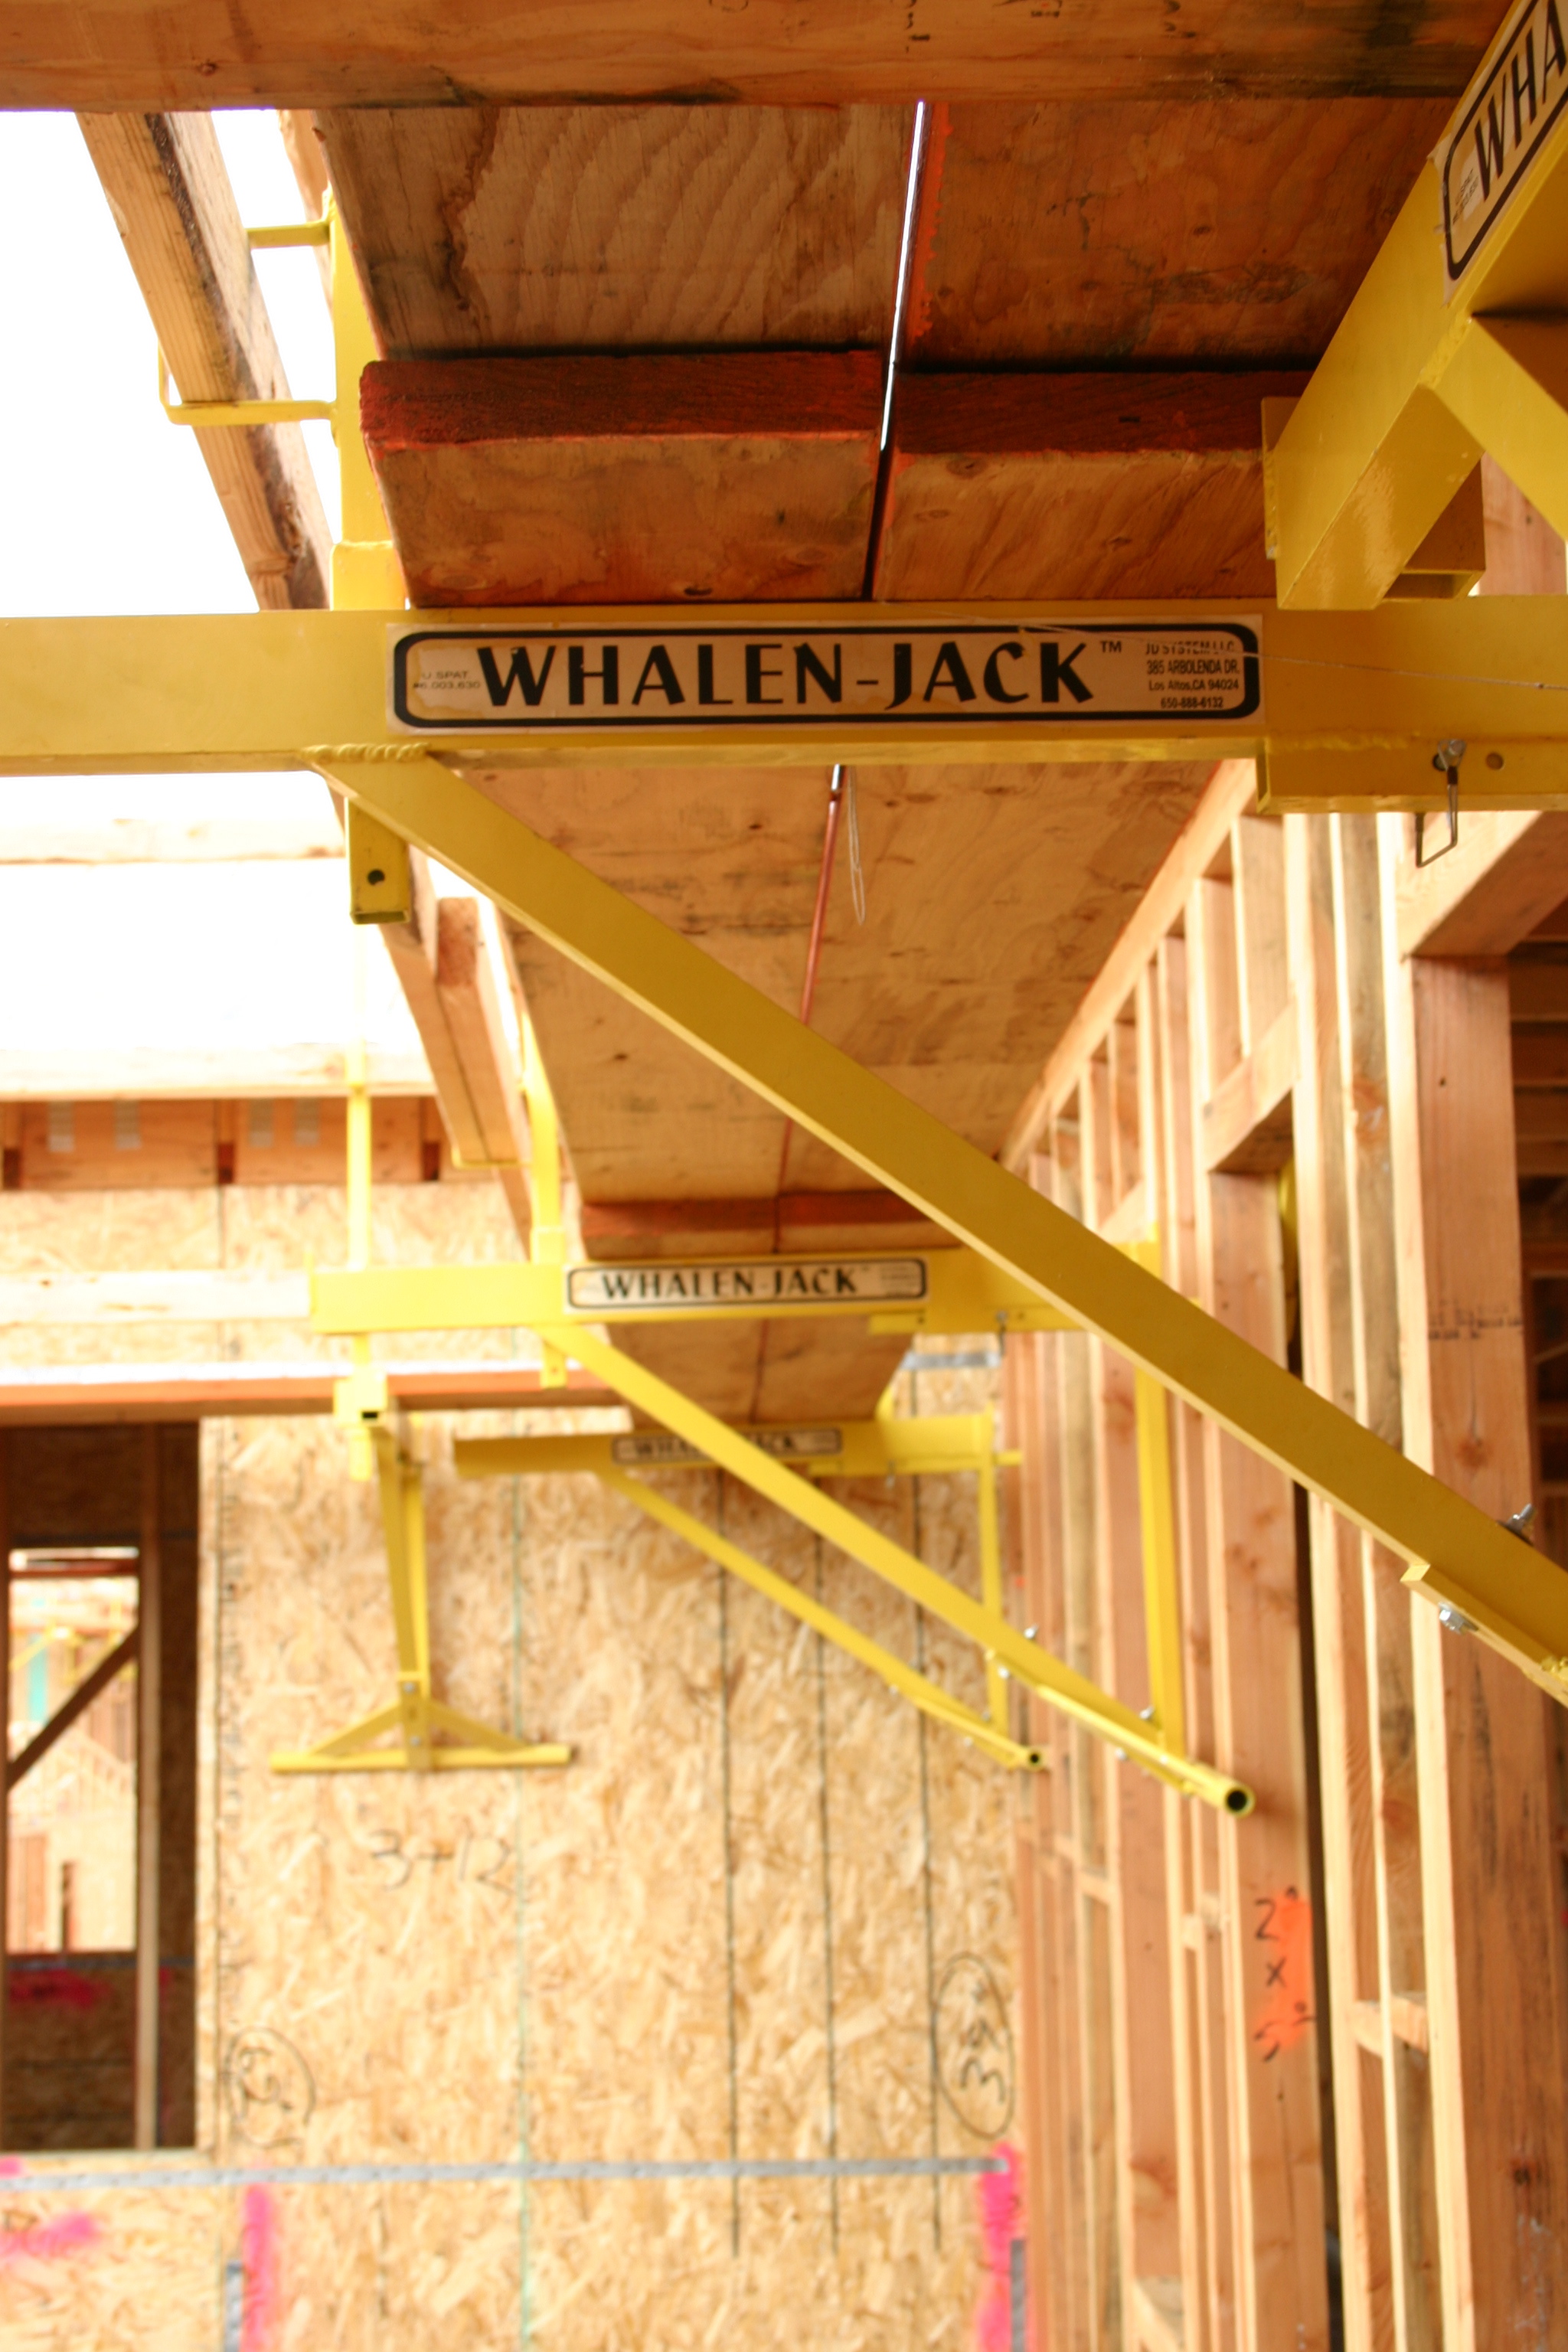 The Whalen Jack on wood framing